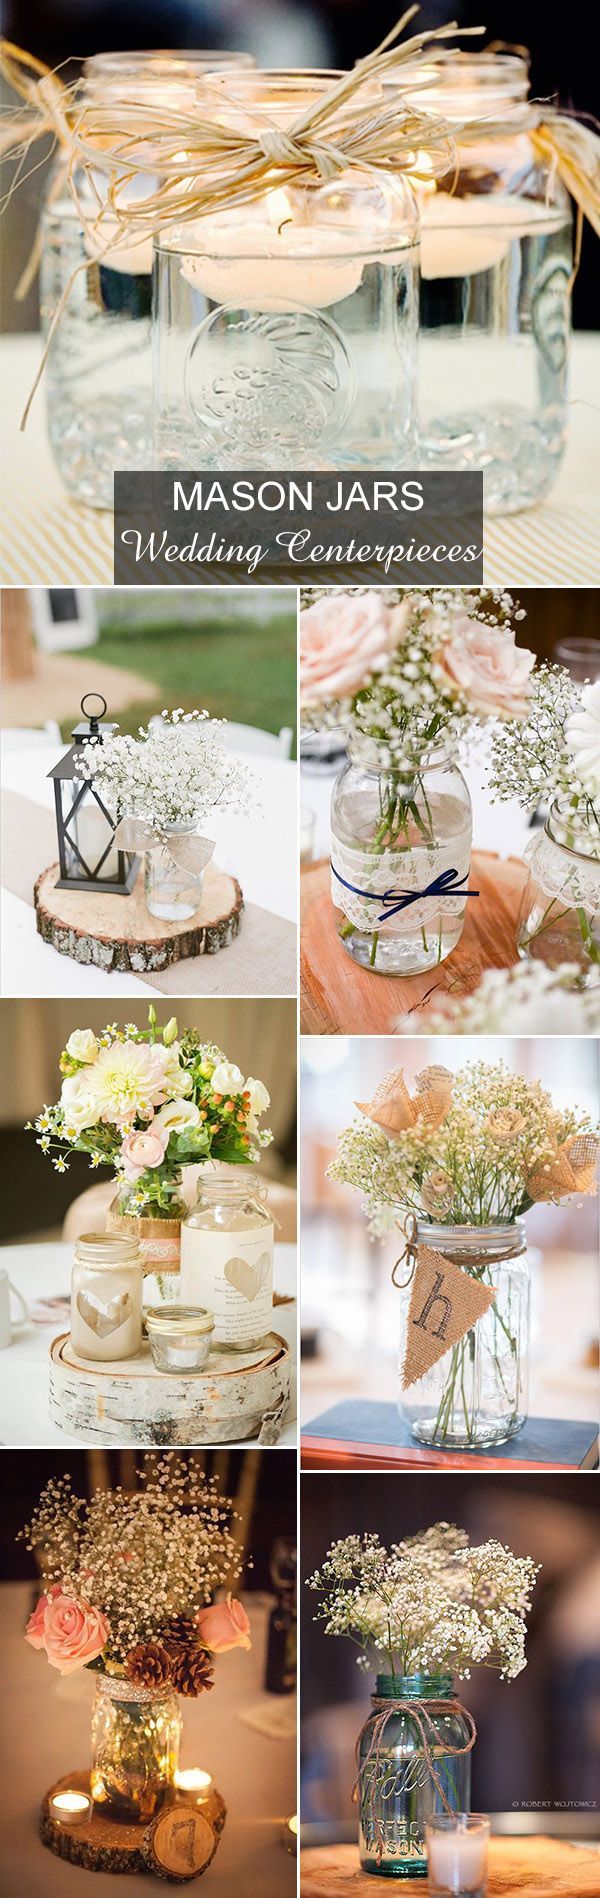 country rustic mason jars inspired wedding centerpieces ideas